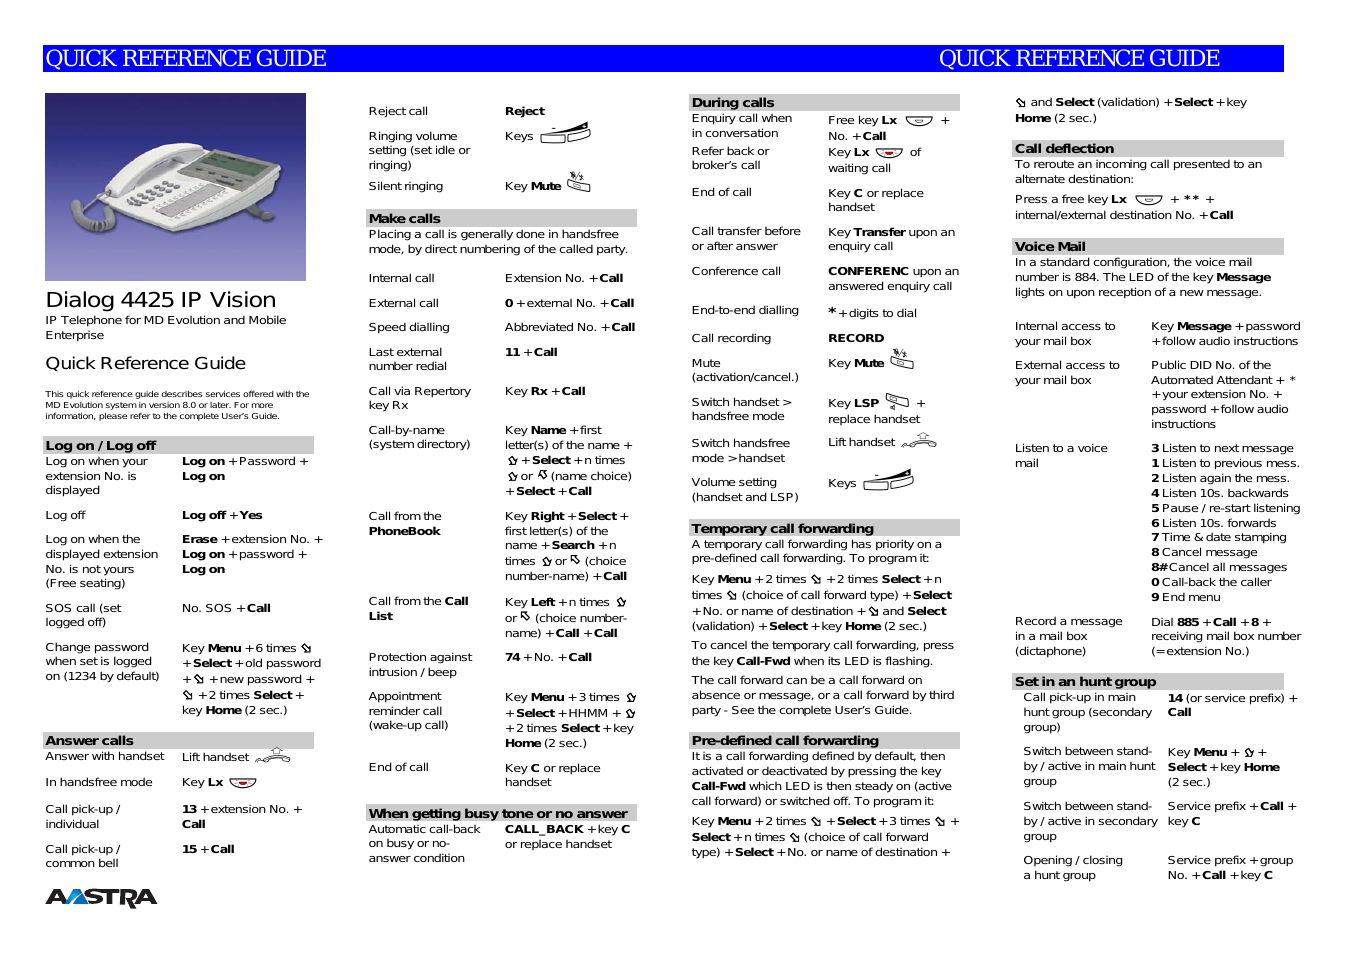 4425 IP Vision for MD Evolution Quick Reference Guide